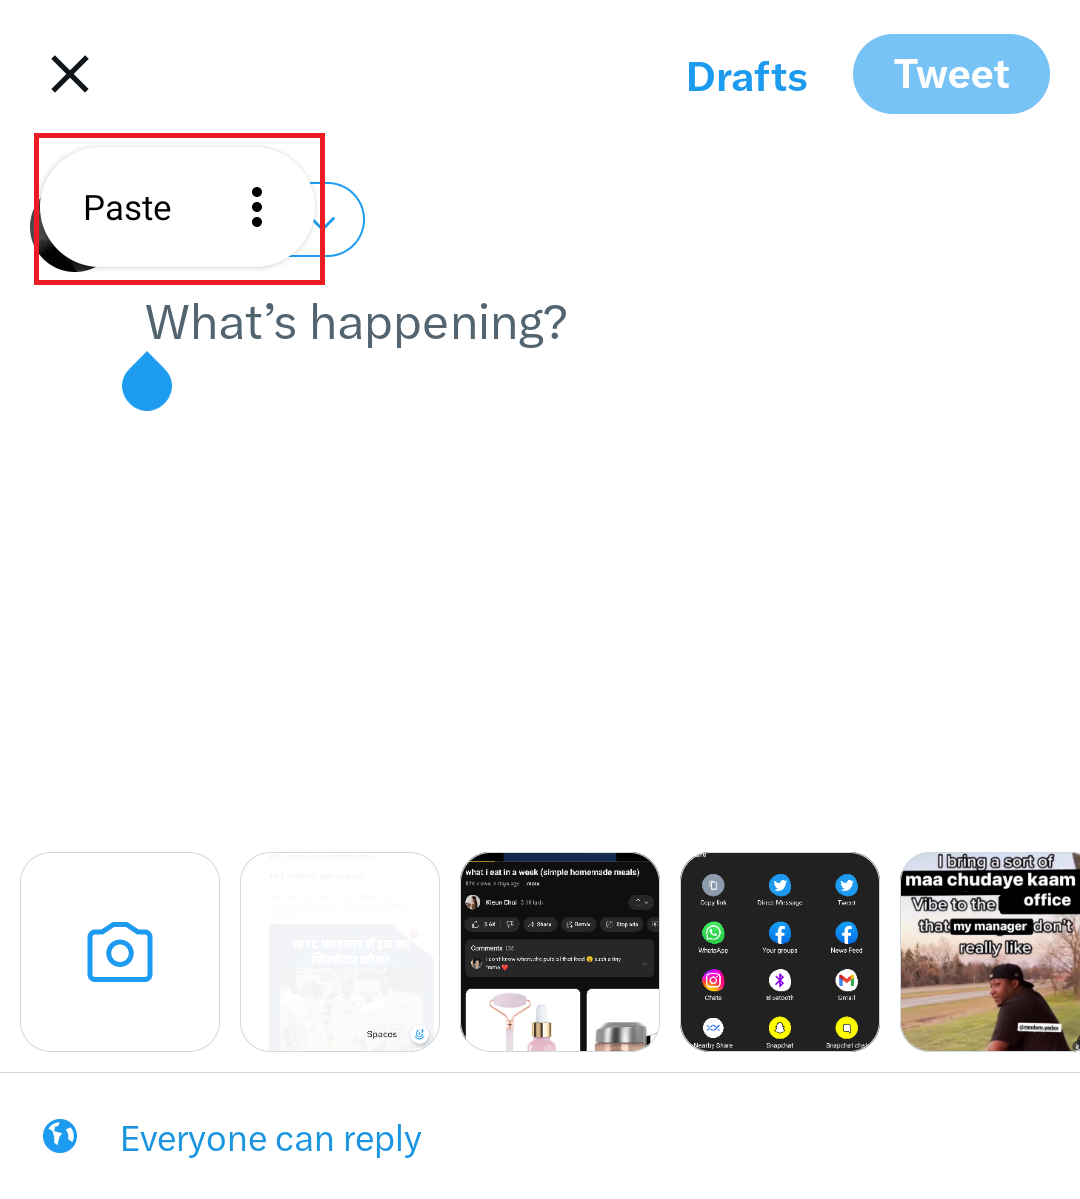 Tap and hold on the What’s happening? section and tap on the Paste option